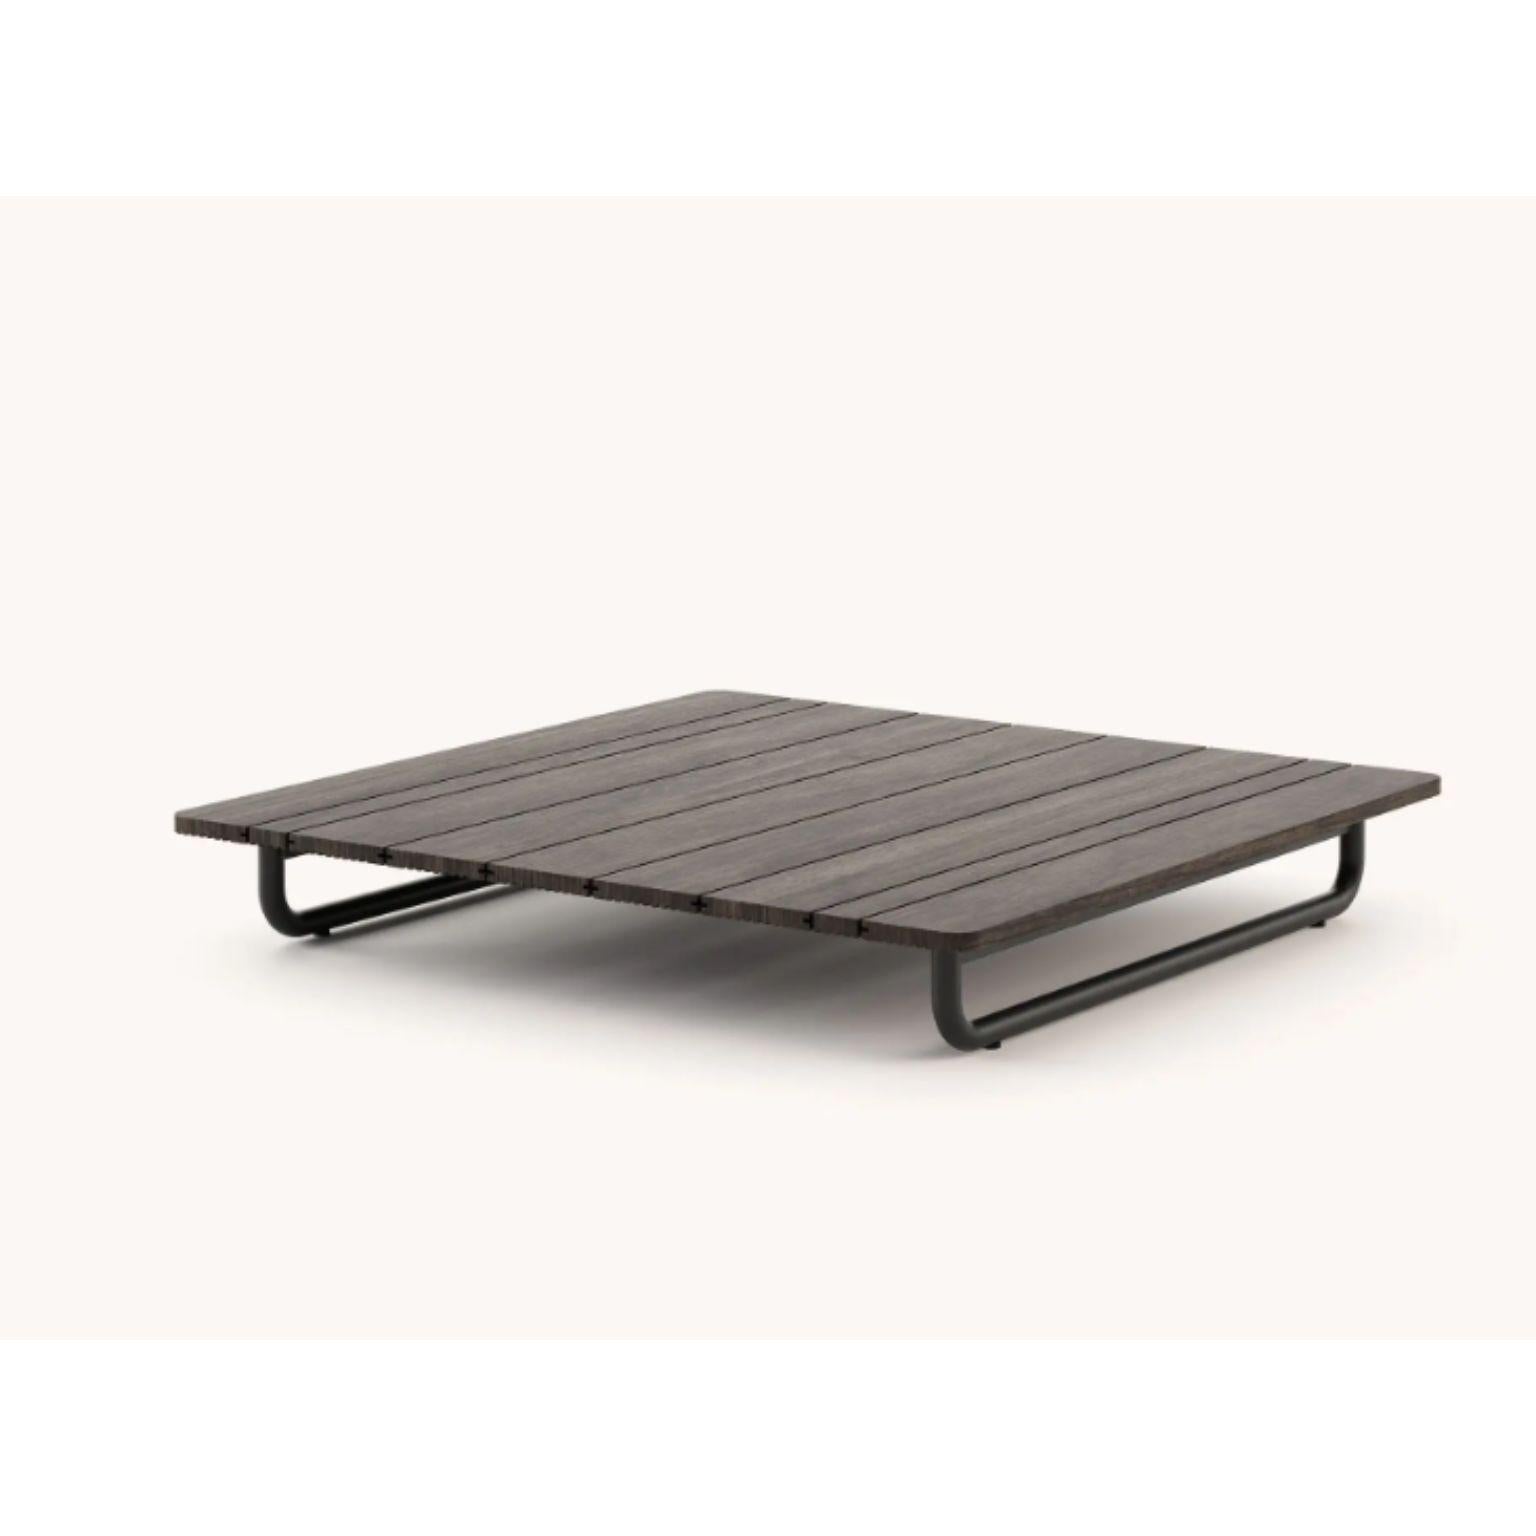 Copacabana center table by Domkapa.
Materials: black texturized stainless steel, bamboo wood. 
Dimensions: W 105 x D 105 x H 19 cm.
Also available in different materials. 

Copacabana Coffee Table provides family-friendly comfort through